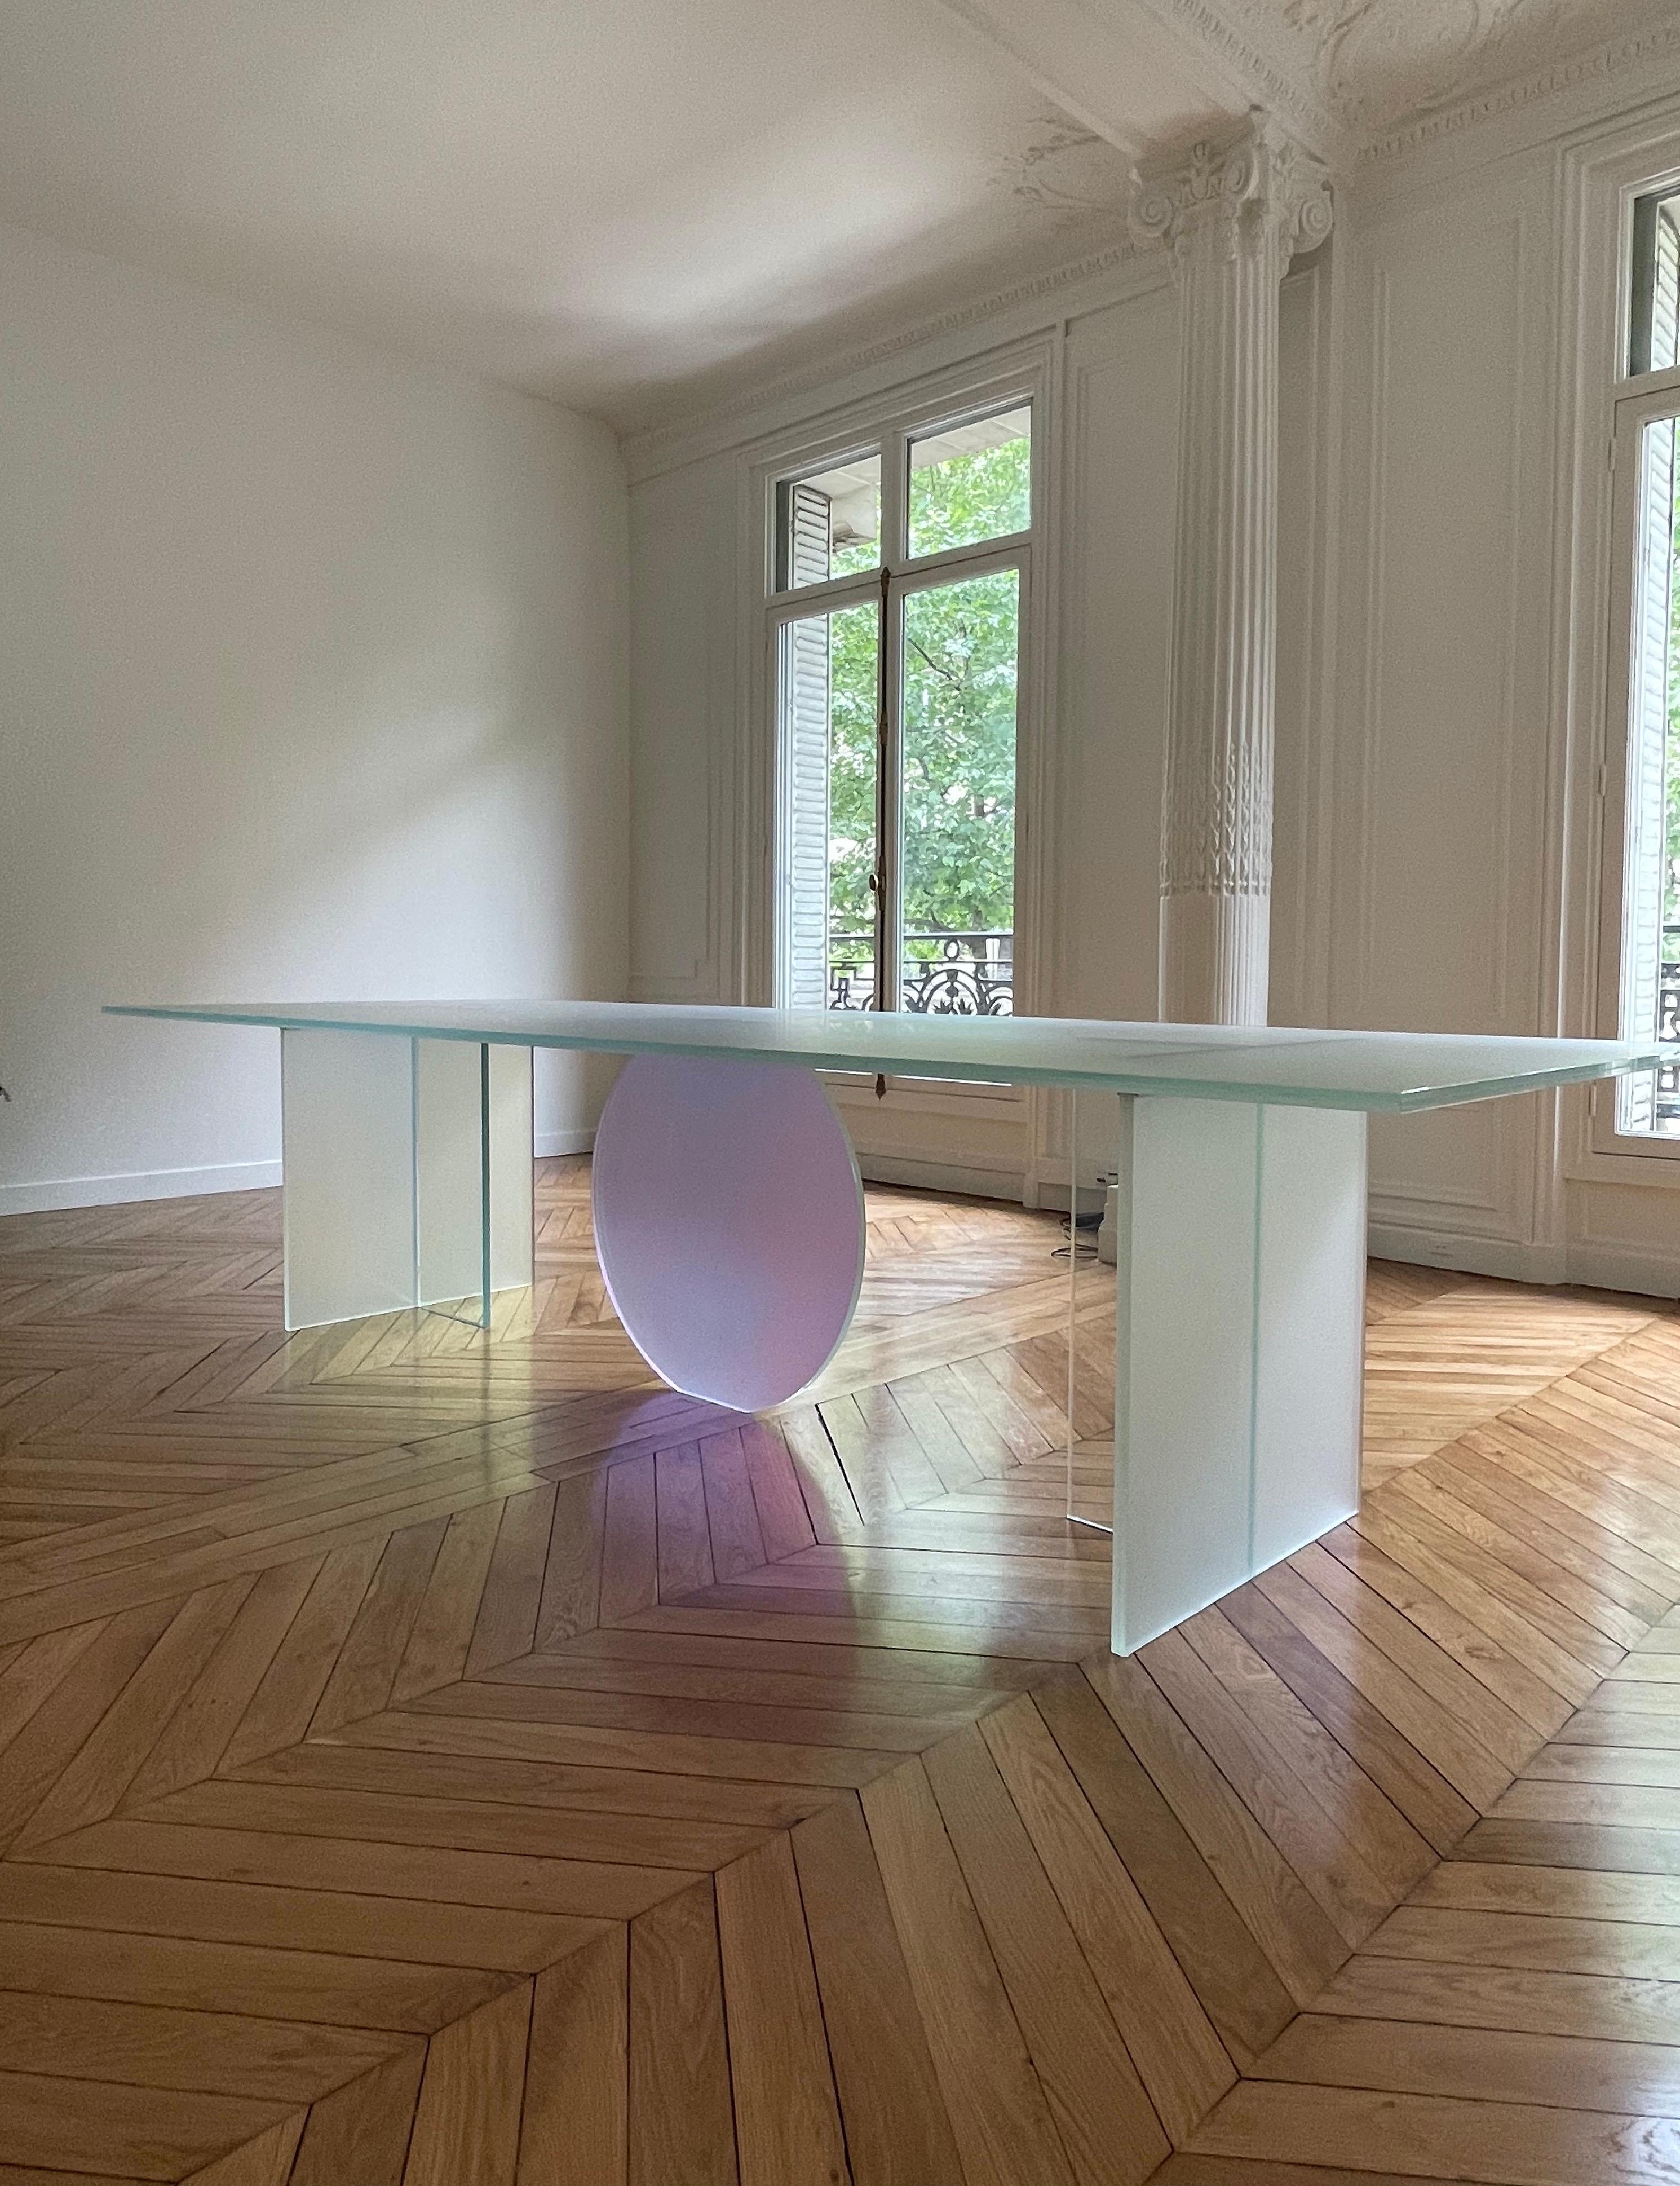 Isola satin dining table by Brajak Vitberg
One of a kind.
Dimensions: H 75cm x D 320 cm x W 120 cm.
Materials: laminated dichroic satin glass.

The table is made out of glass with satin finish and dichroic insert. The colors in this kind of